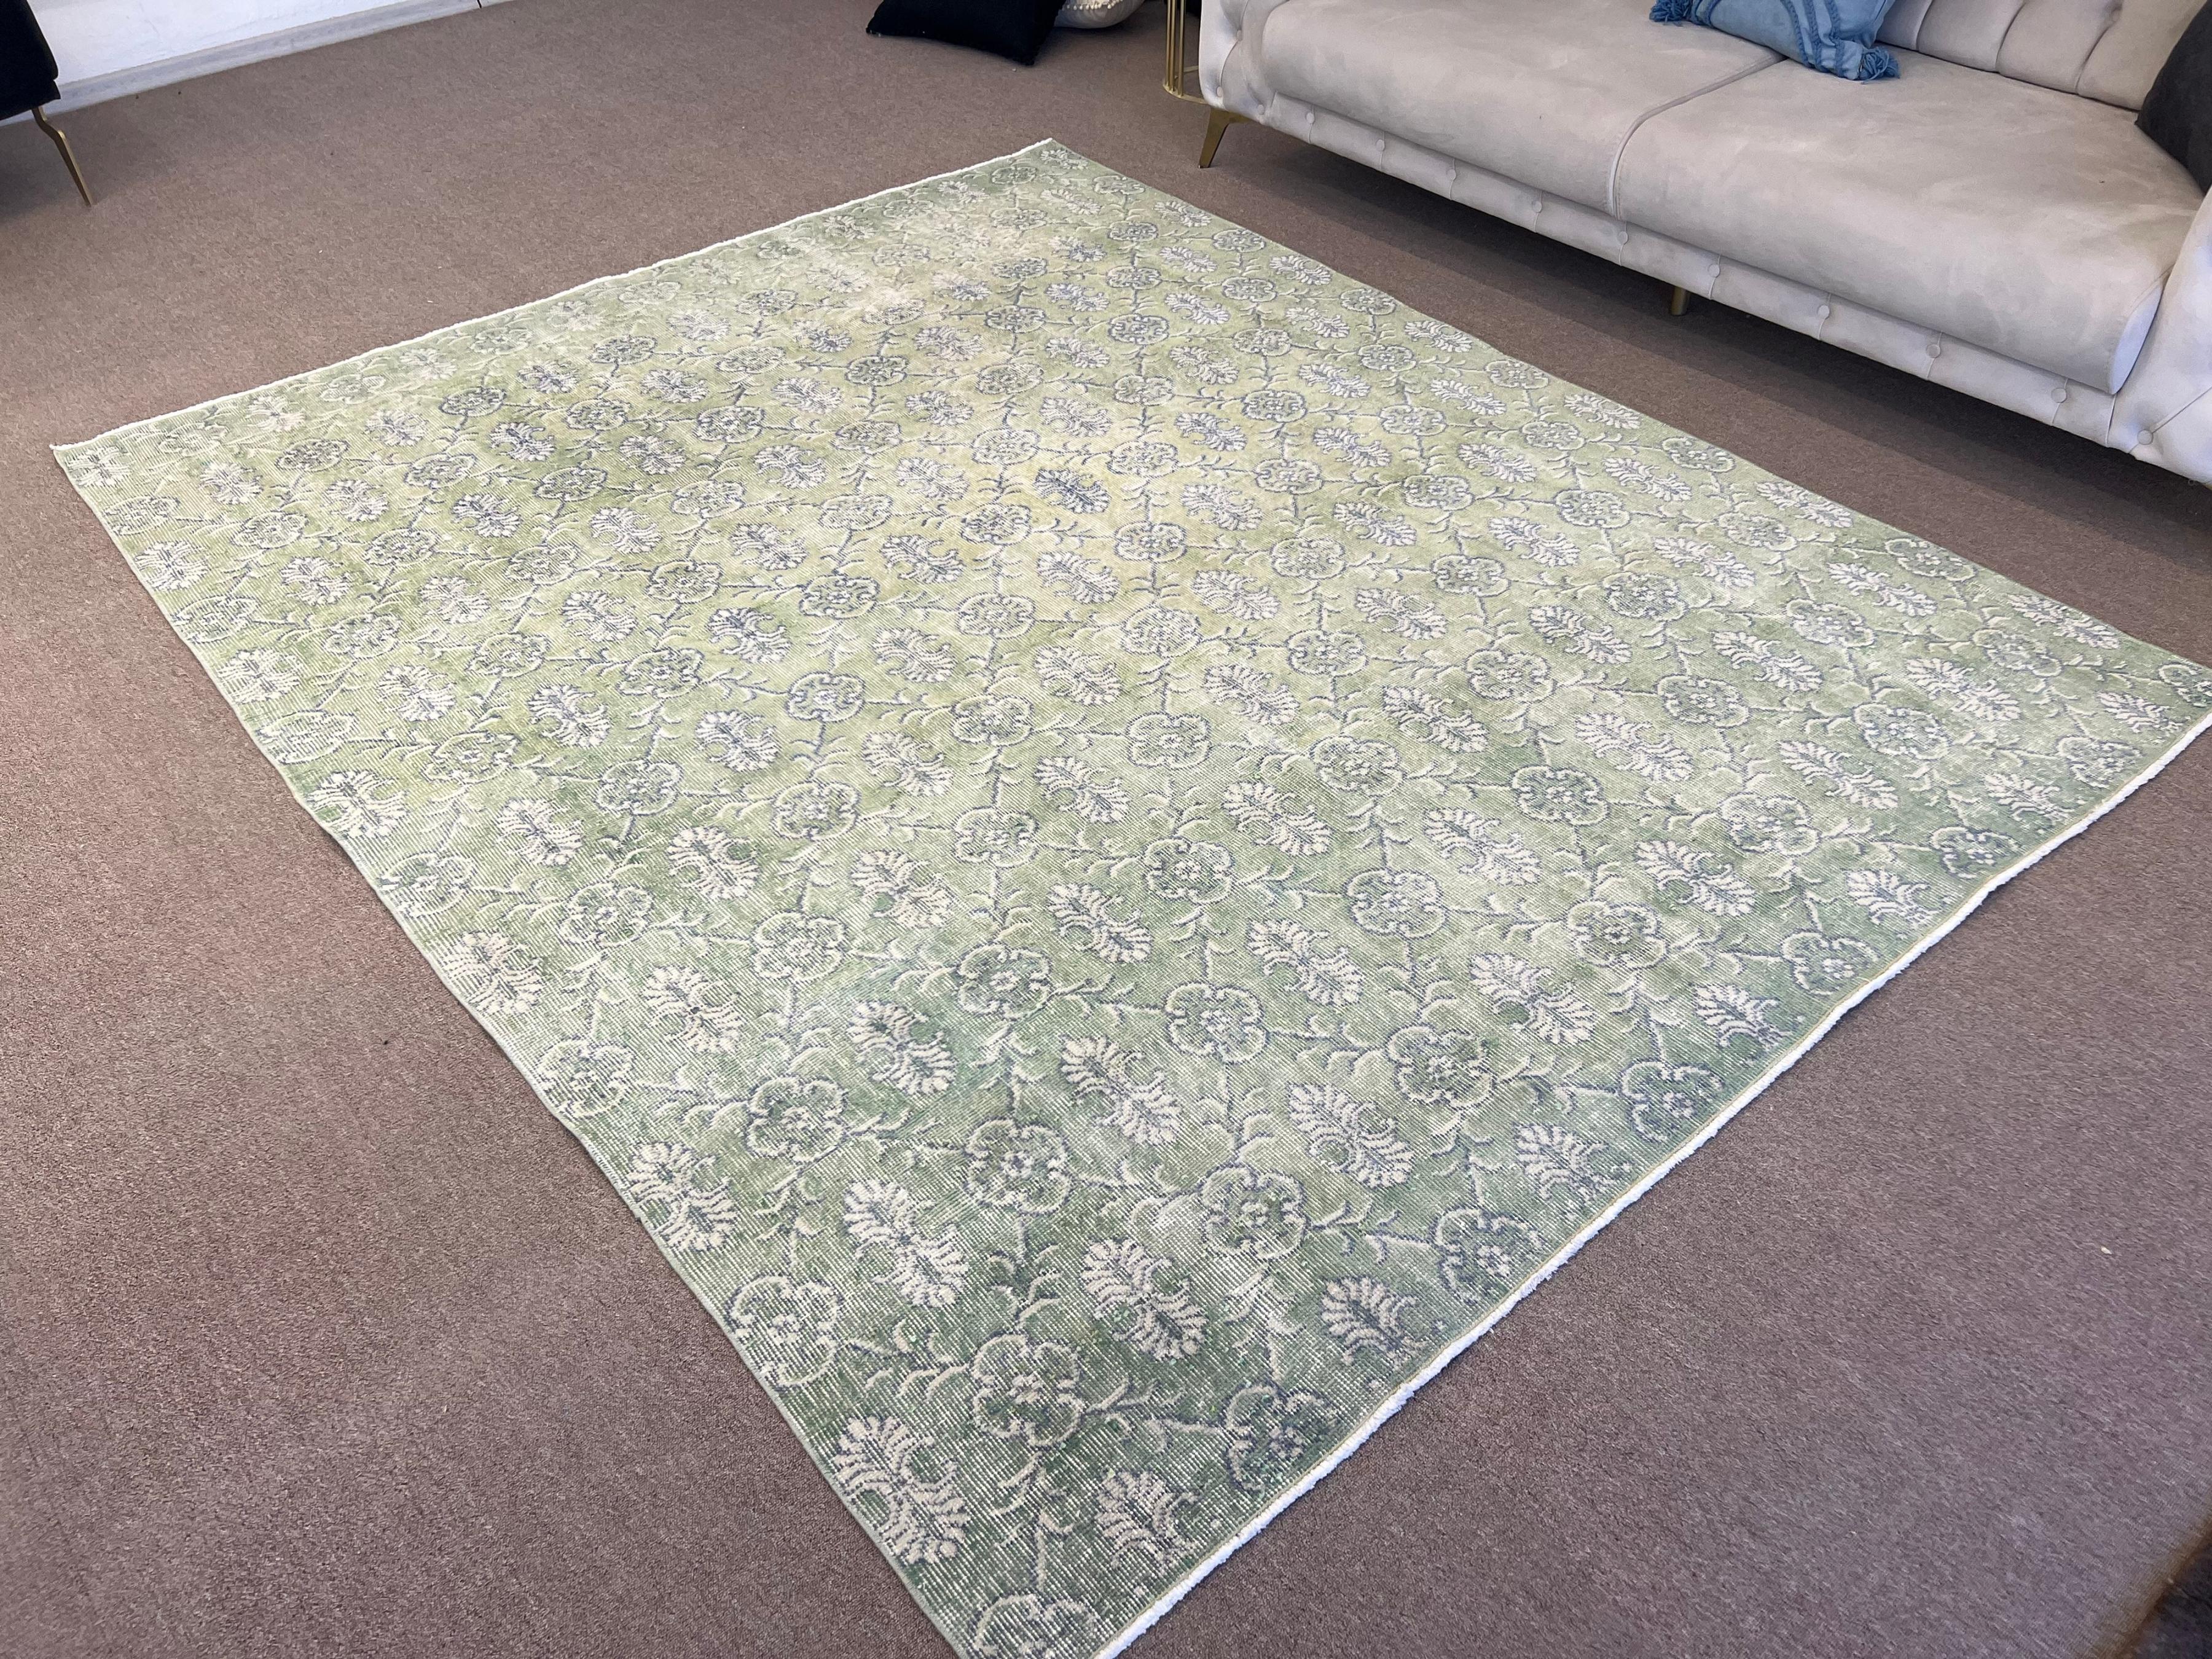 20th Century 7.5x9 Ft Handmade Vintage Turkish Area Rug in Green with All-Over Floral Design